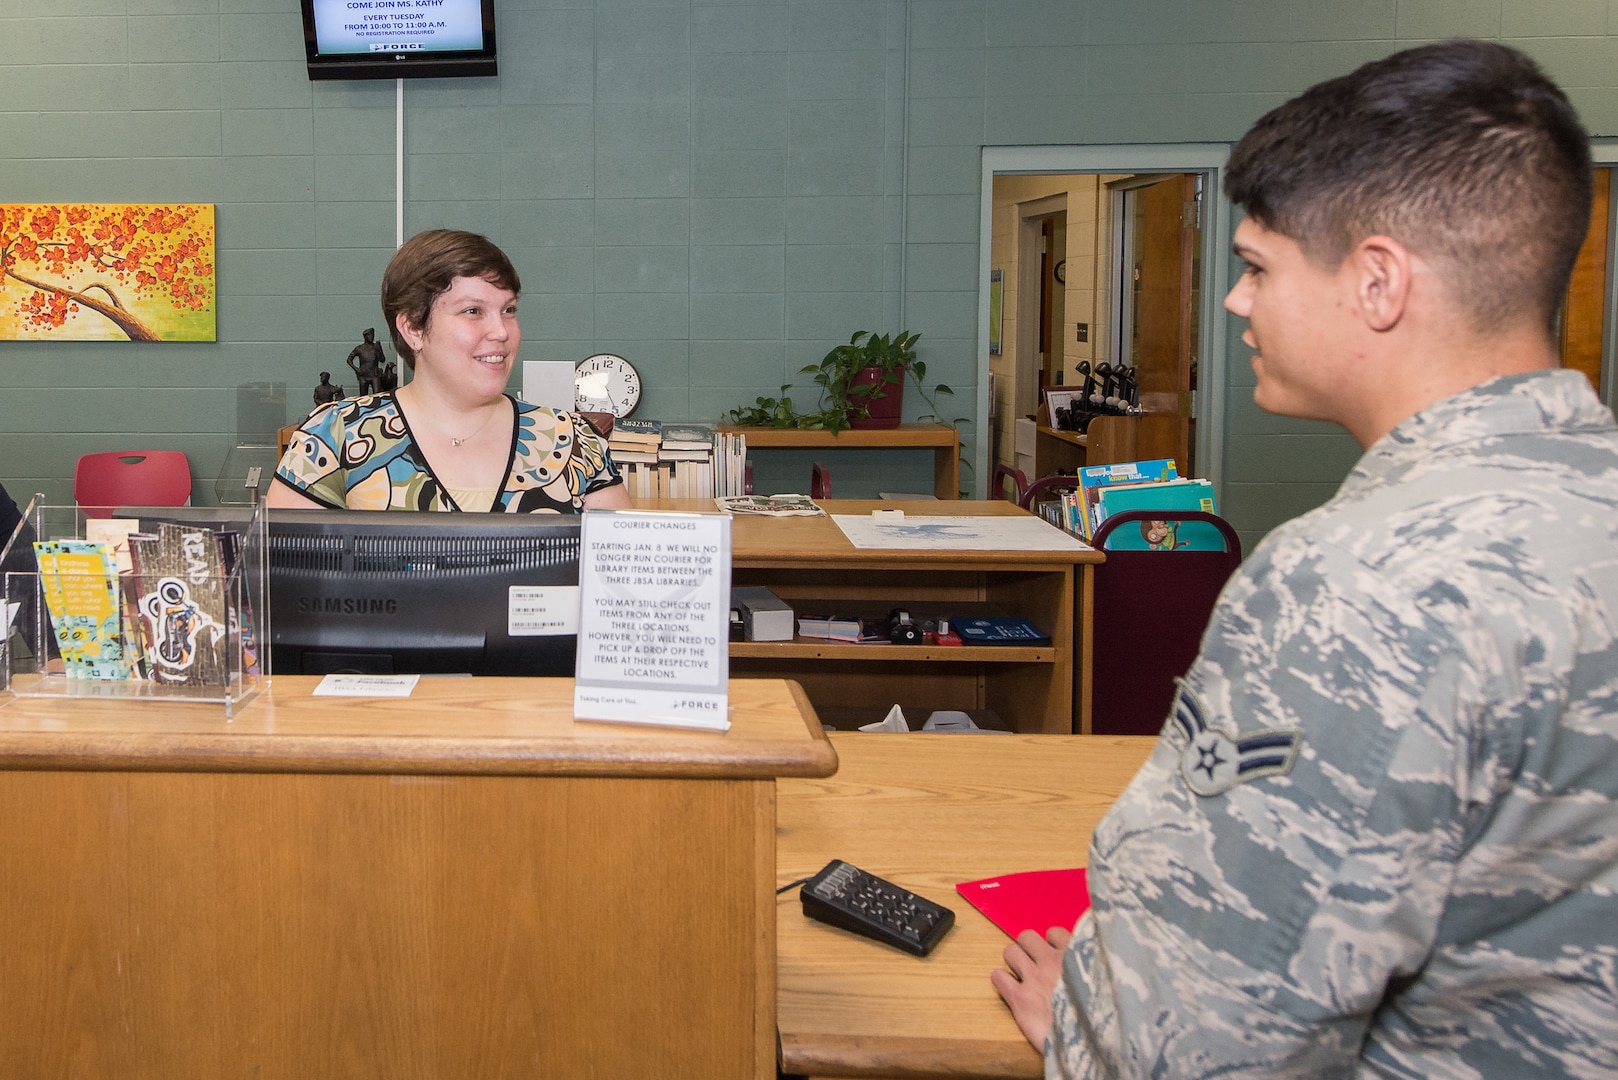 JBSA Lackland Library Re-Opening